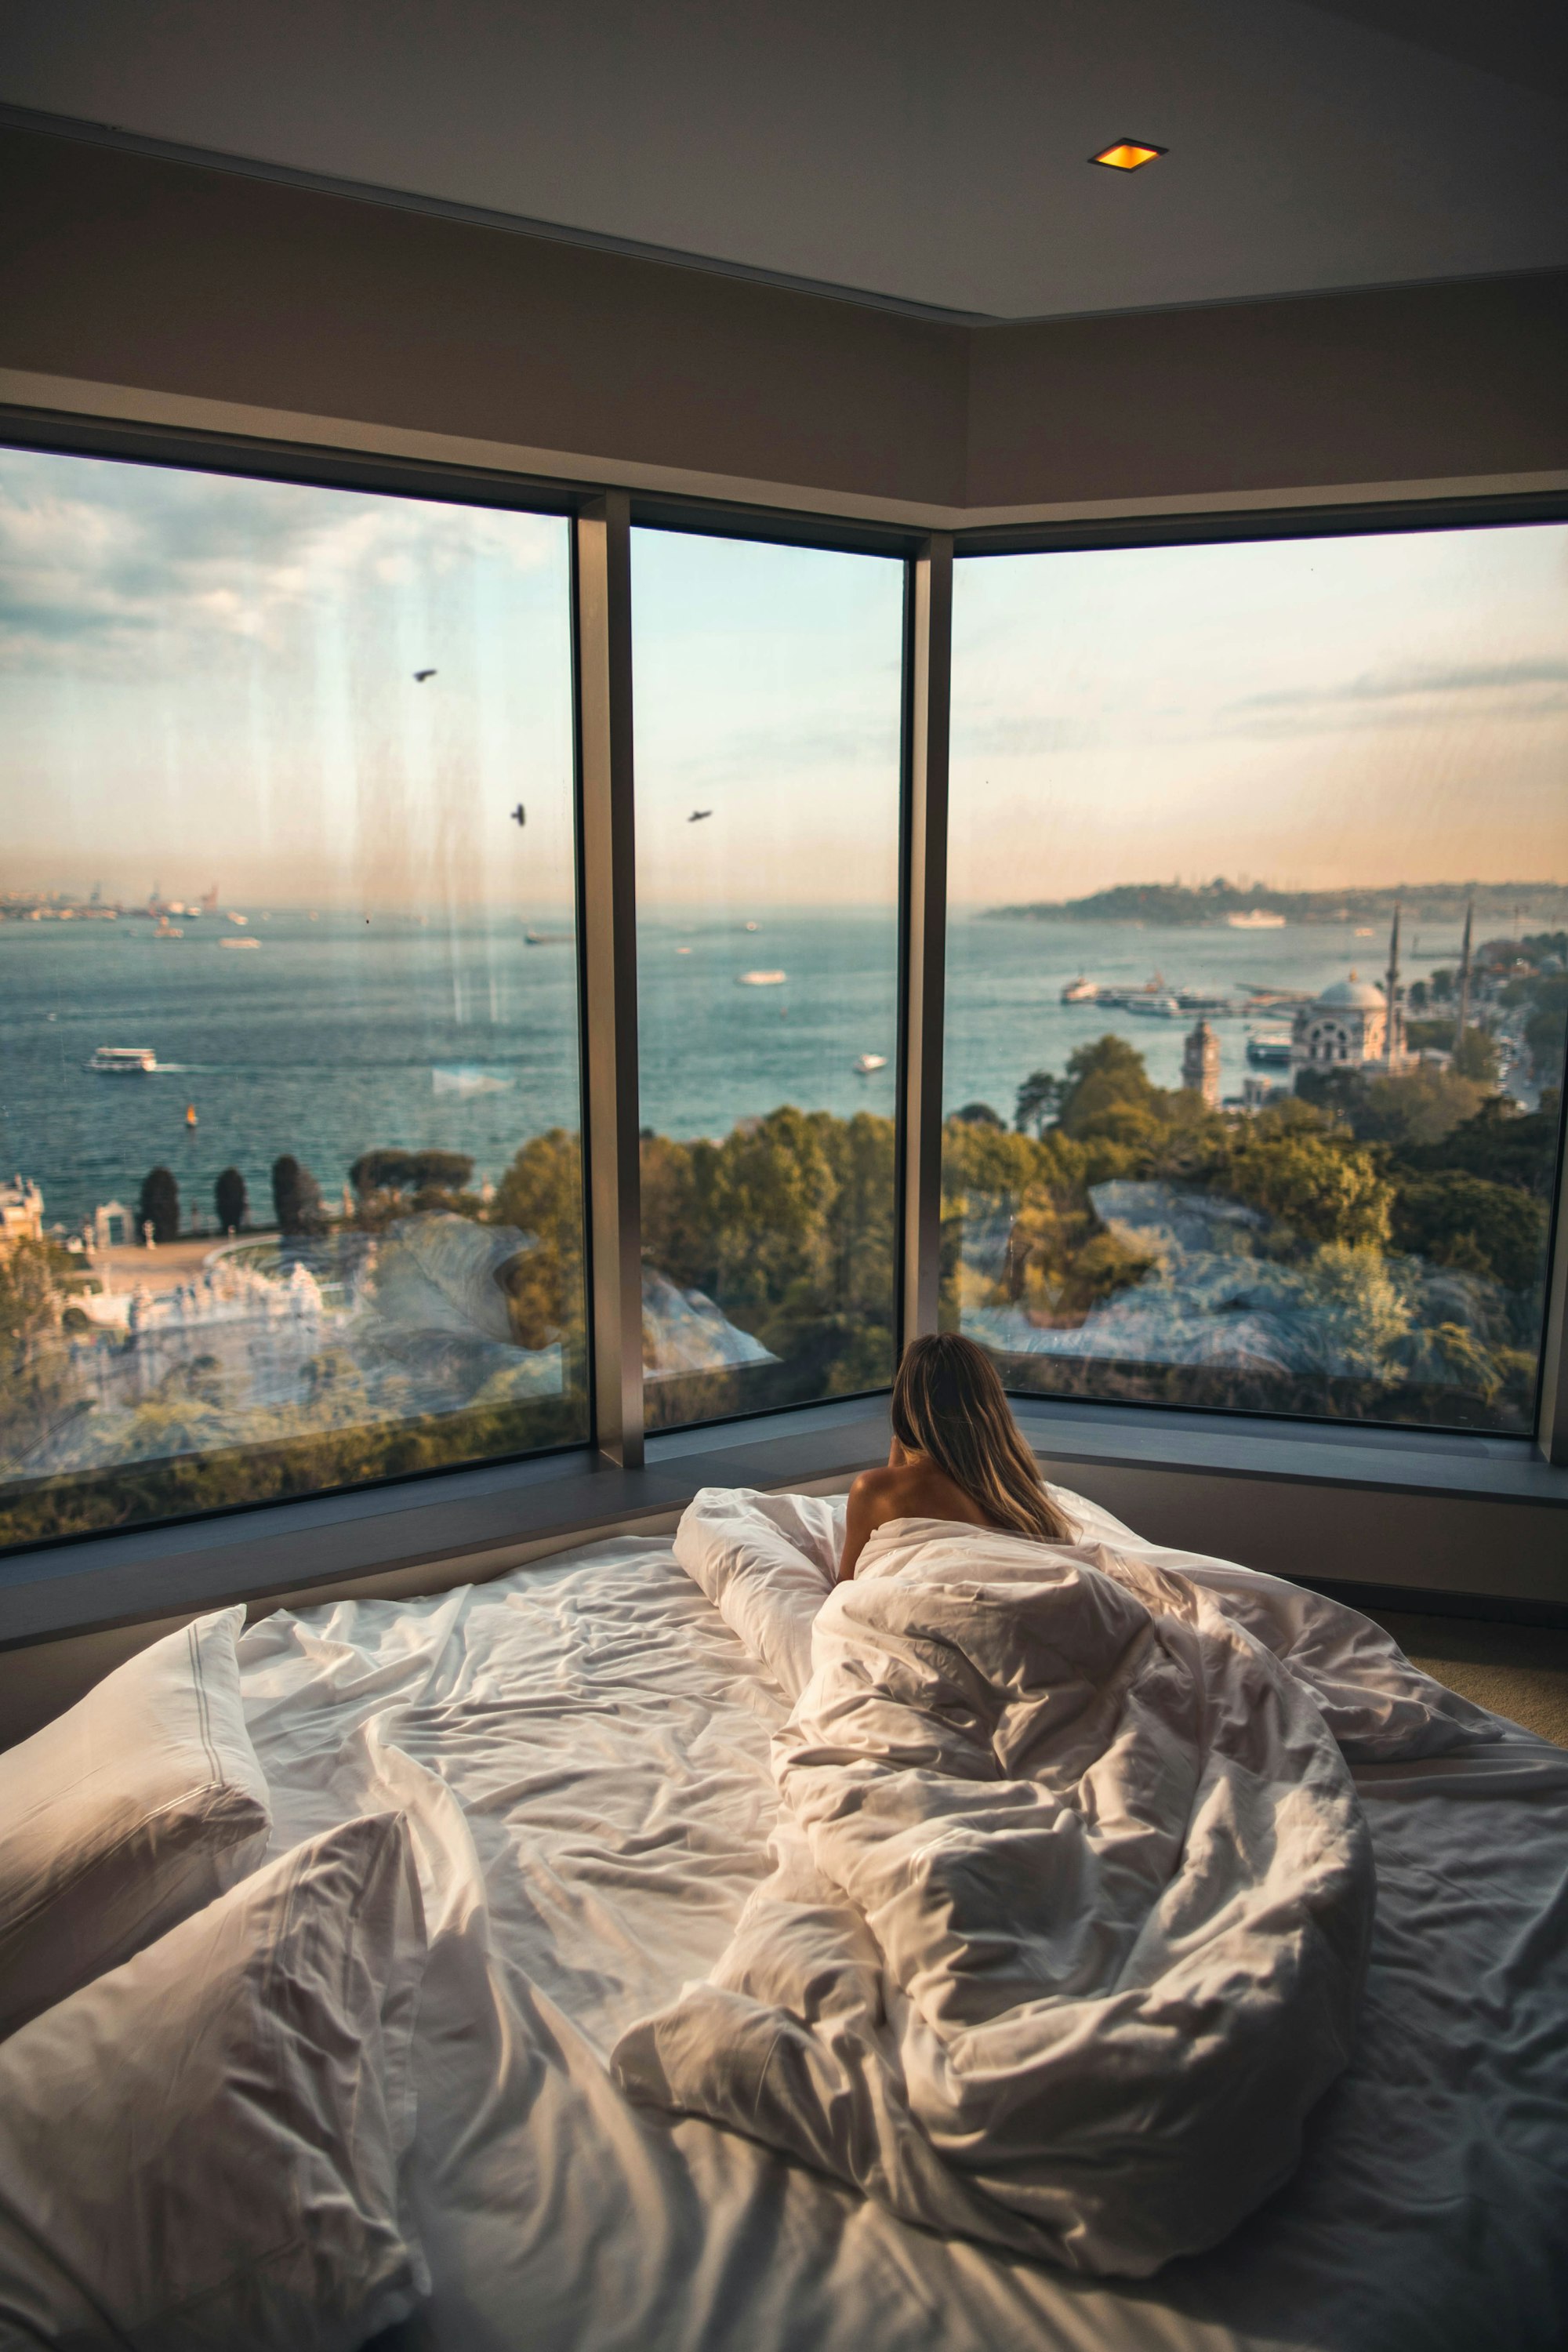 Carleigh (@carleighelise) enjoying the view from the Swissotel in Istanbul.

If you find my photos useful, please consider subscribing to me on YouTube for the occasional photography tutorial and much more - https://bit.ly/3smVlKp - I'd greatly appreciate it!